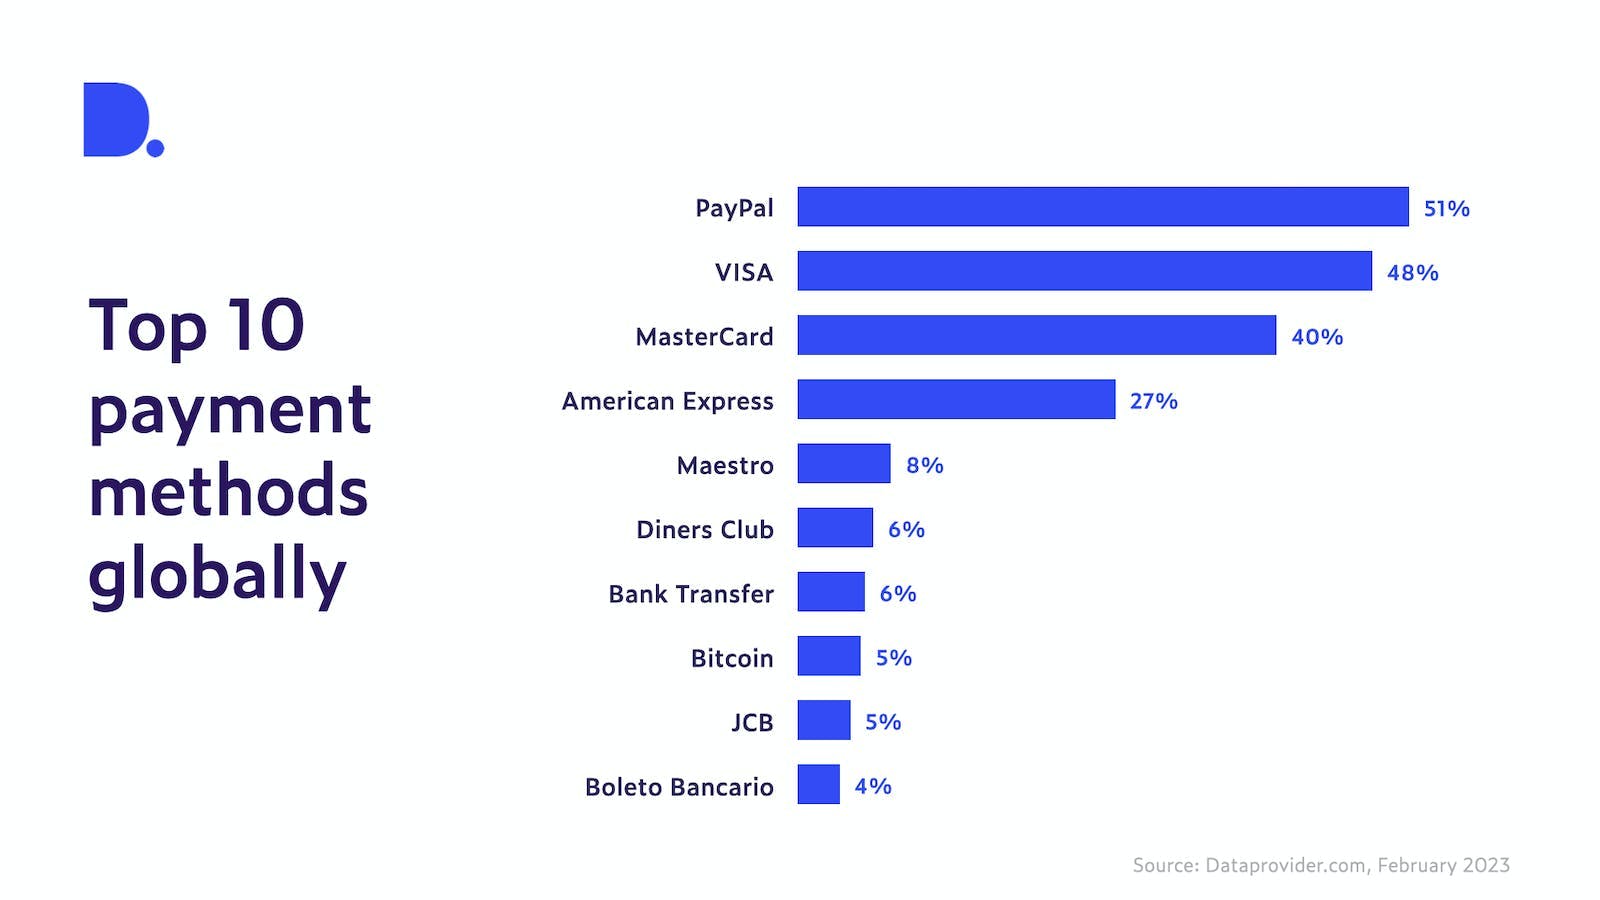 Share of most popular payment methods globally based on number of website offering these methods.